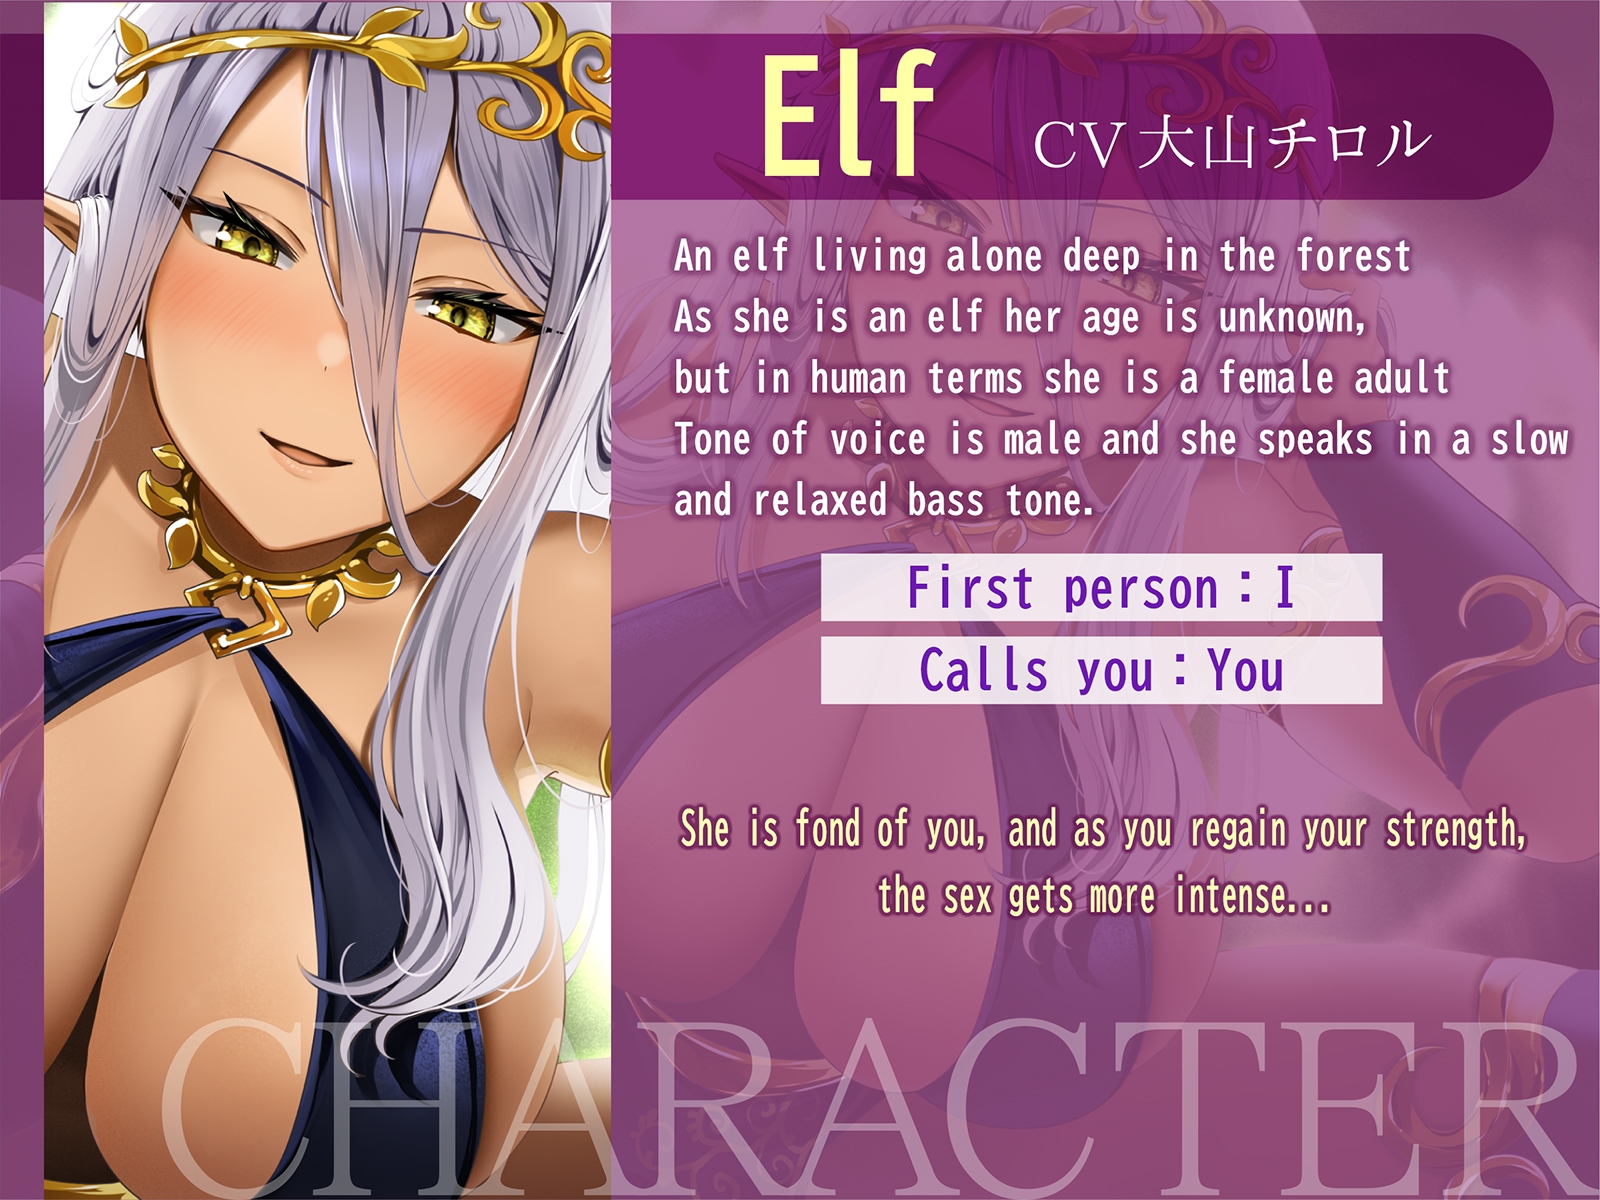 ENG Ver[Bass × Elf × oho voice] The Slow, Moist, Lewd Care of a Sister Elf